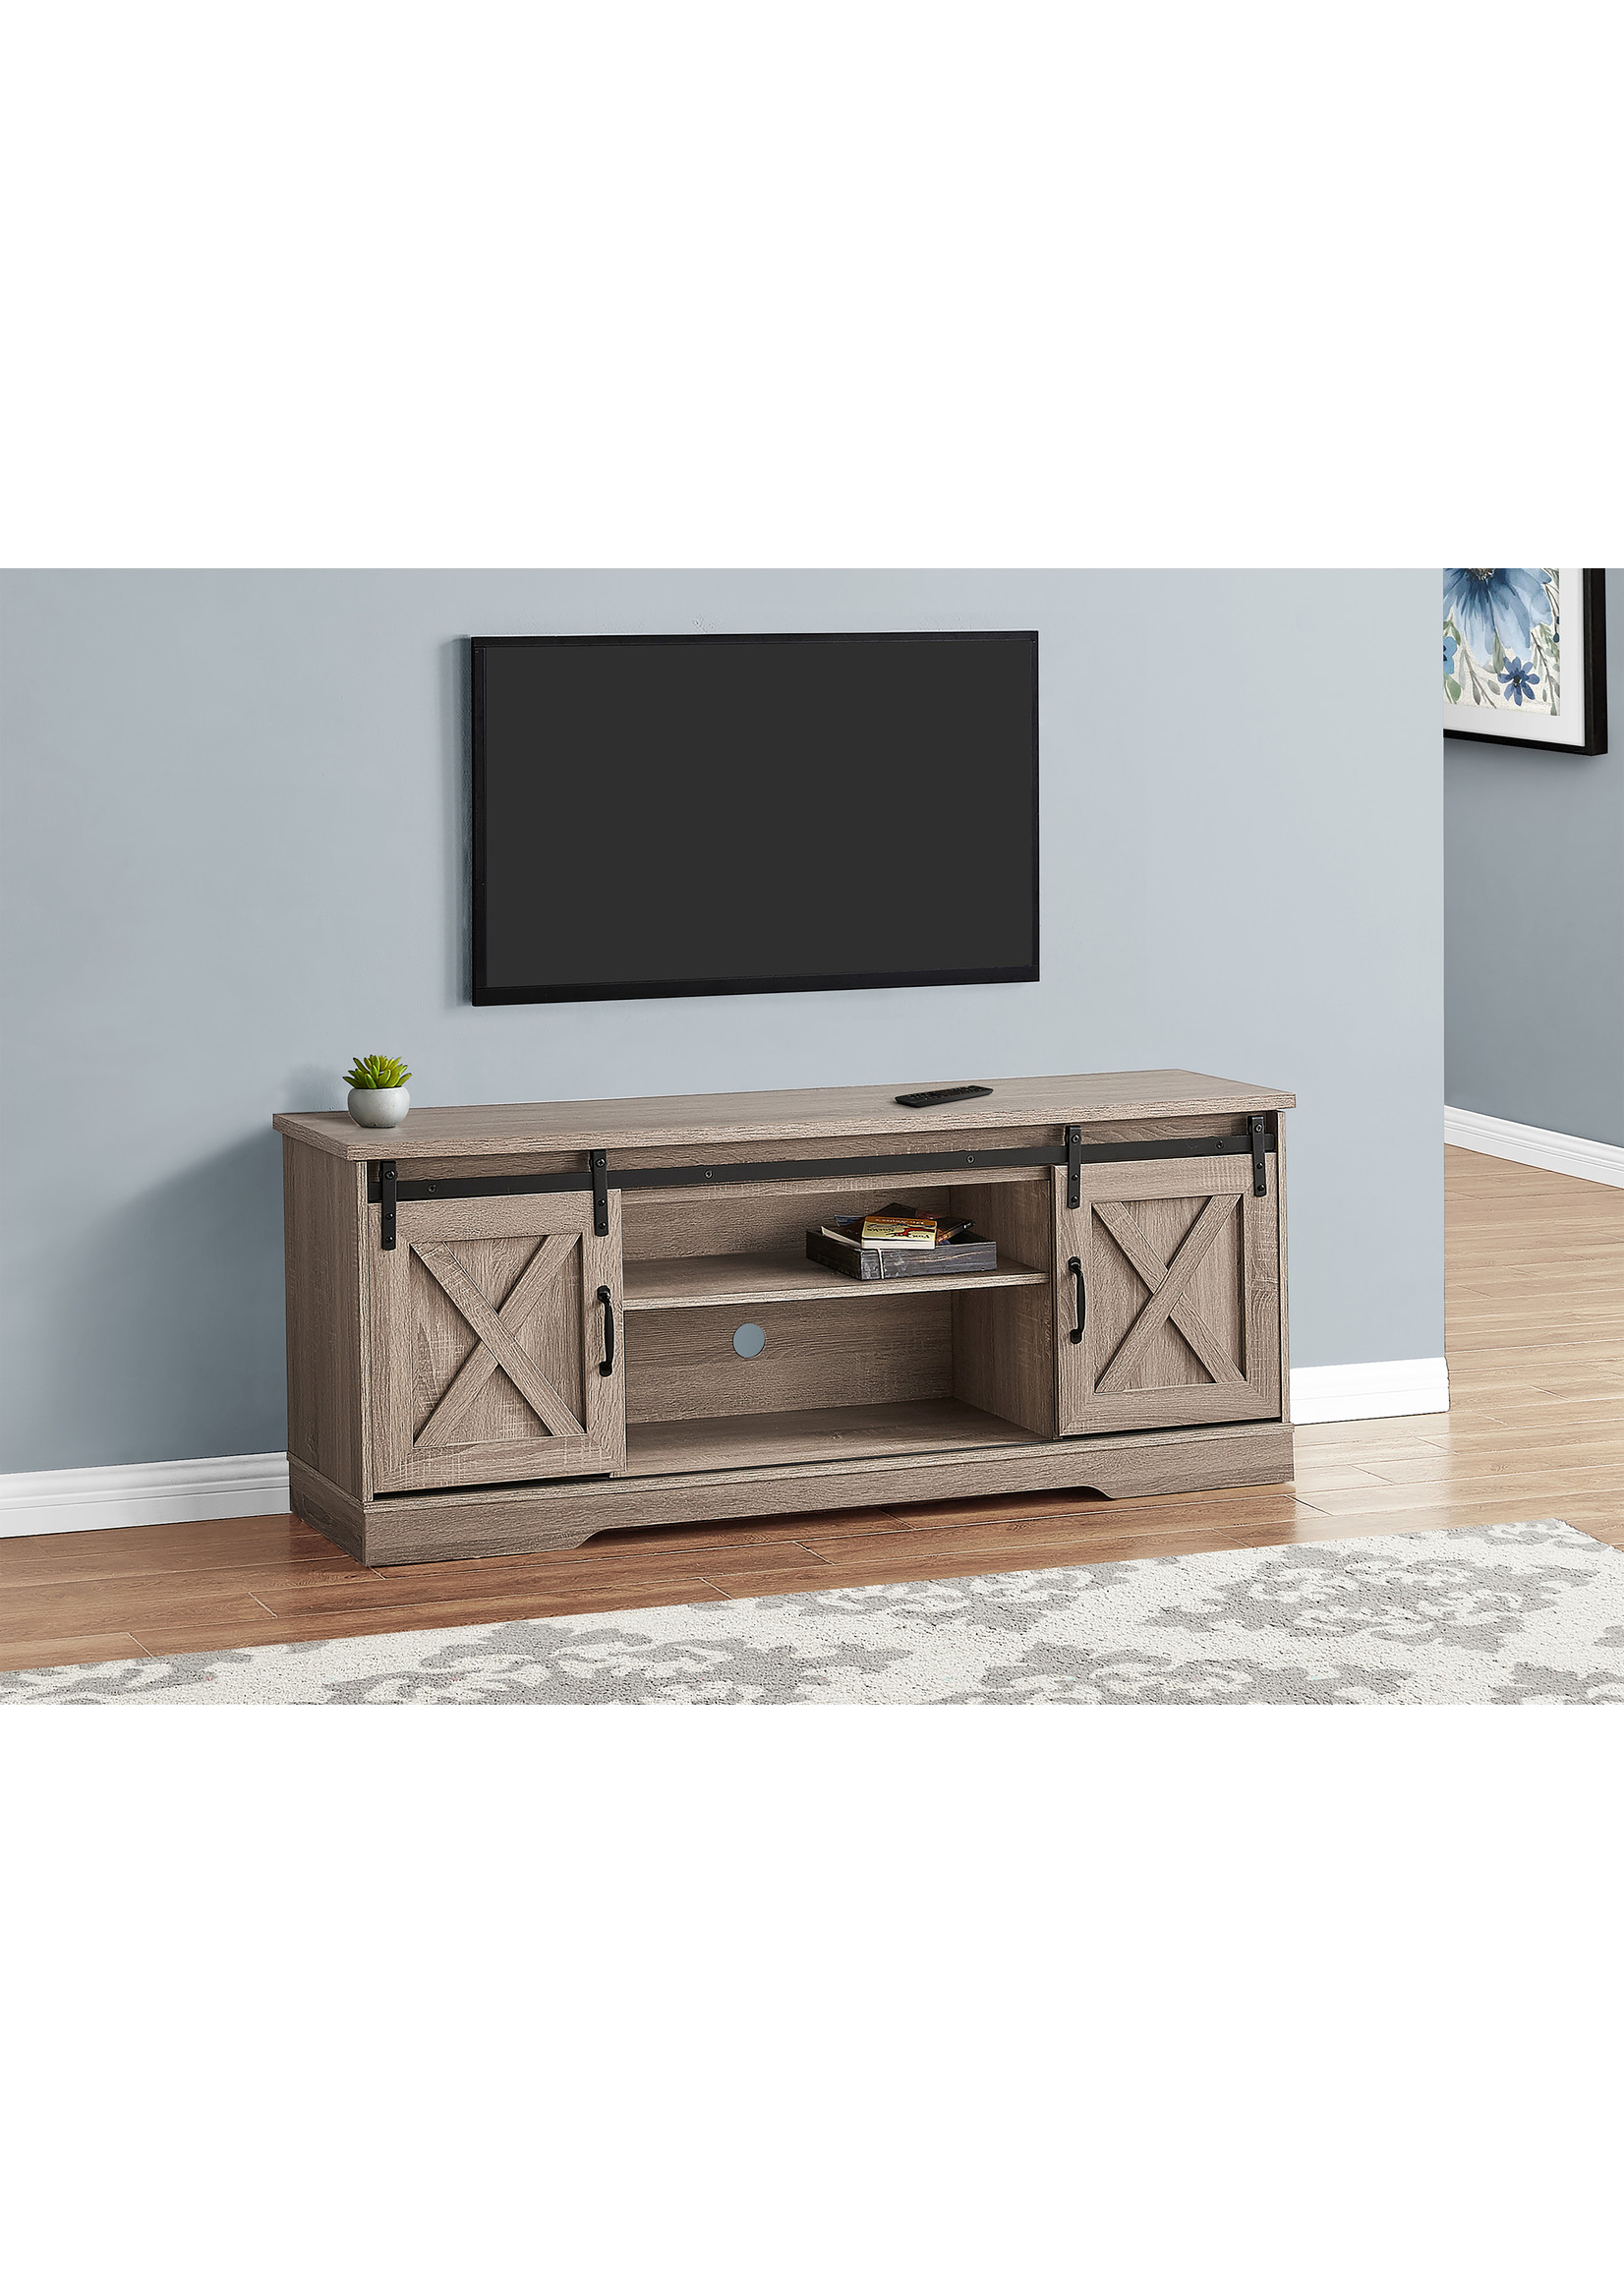 TV STAND - 60"L / Dark Taupe With 2 Sliding Doors